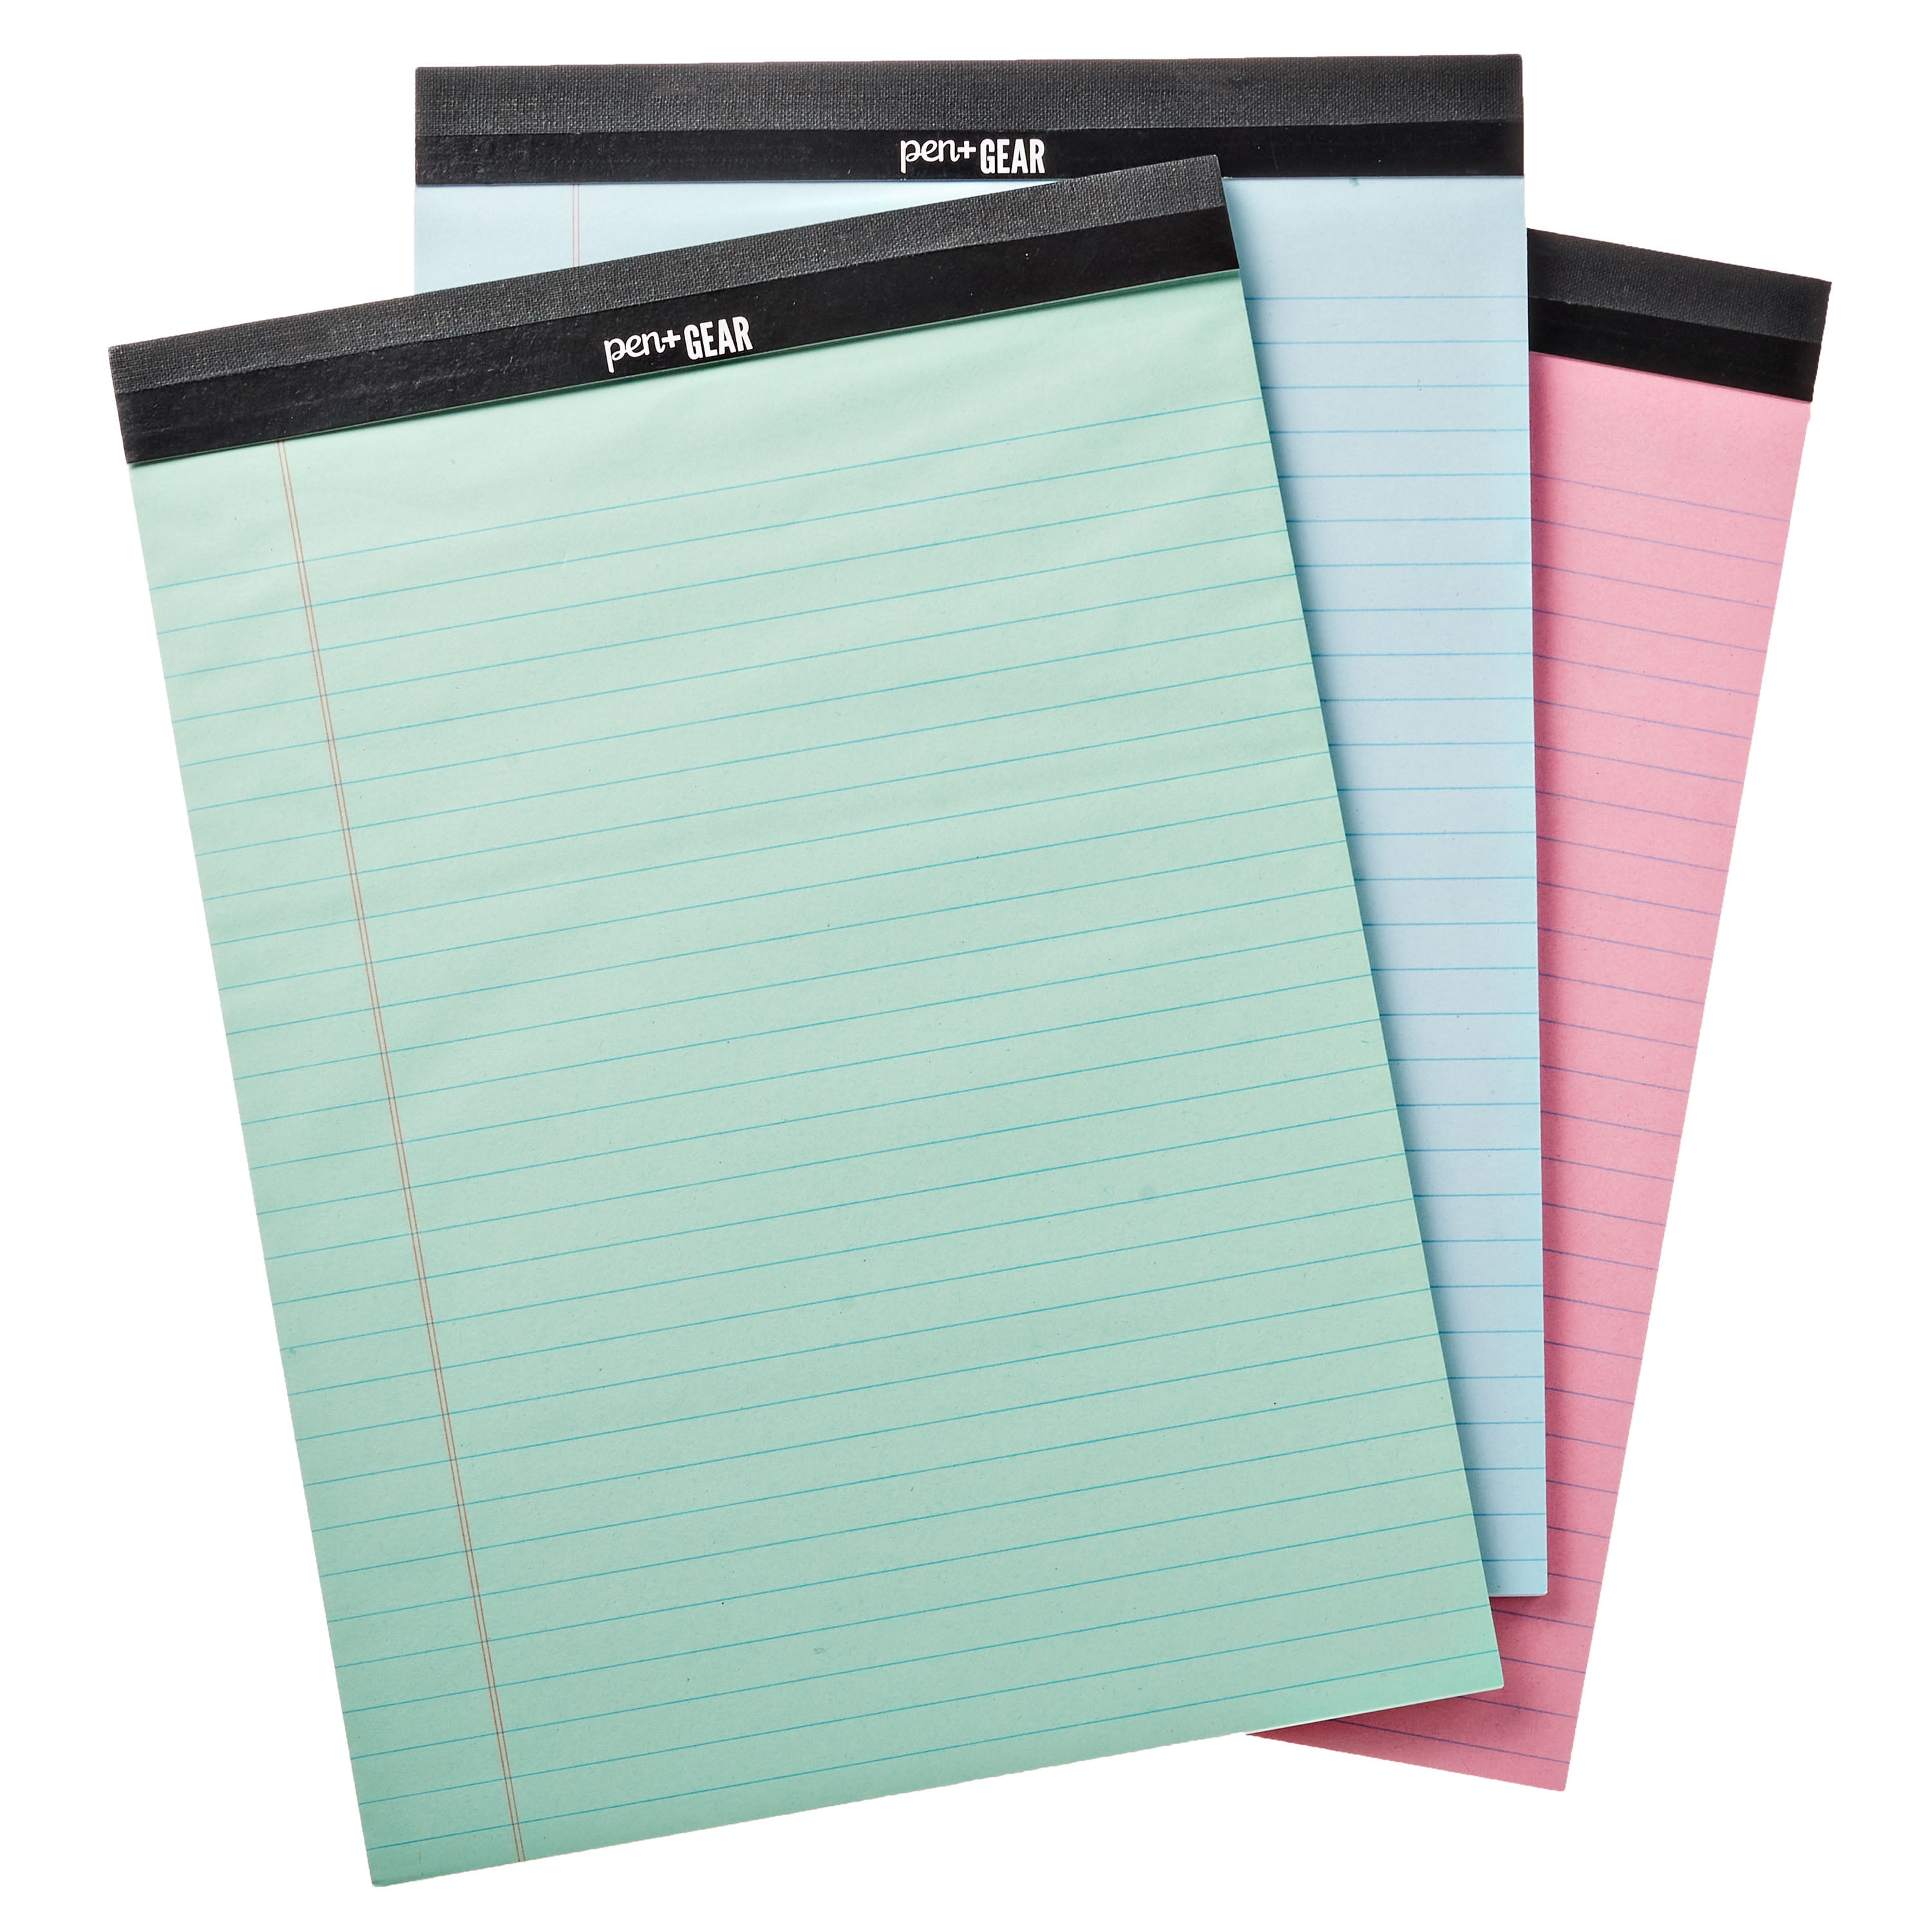 Work Basic 6pk - Office 8.5in x 11in Pastel Set 2 Mintra Office Legal Pads Micro perforated Writing Pad/Notebook Paper for School 50 Sheets per Notepad College Wide Ruled